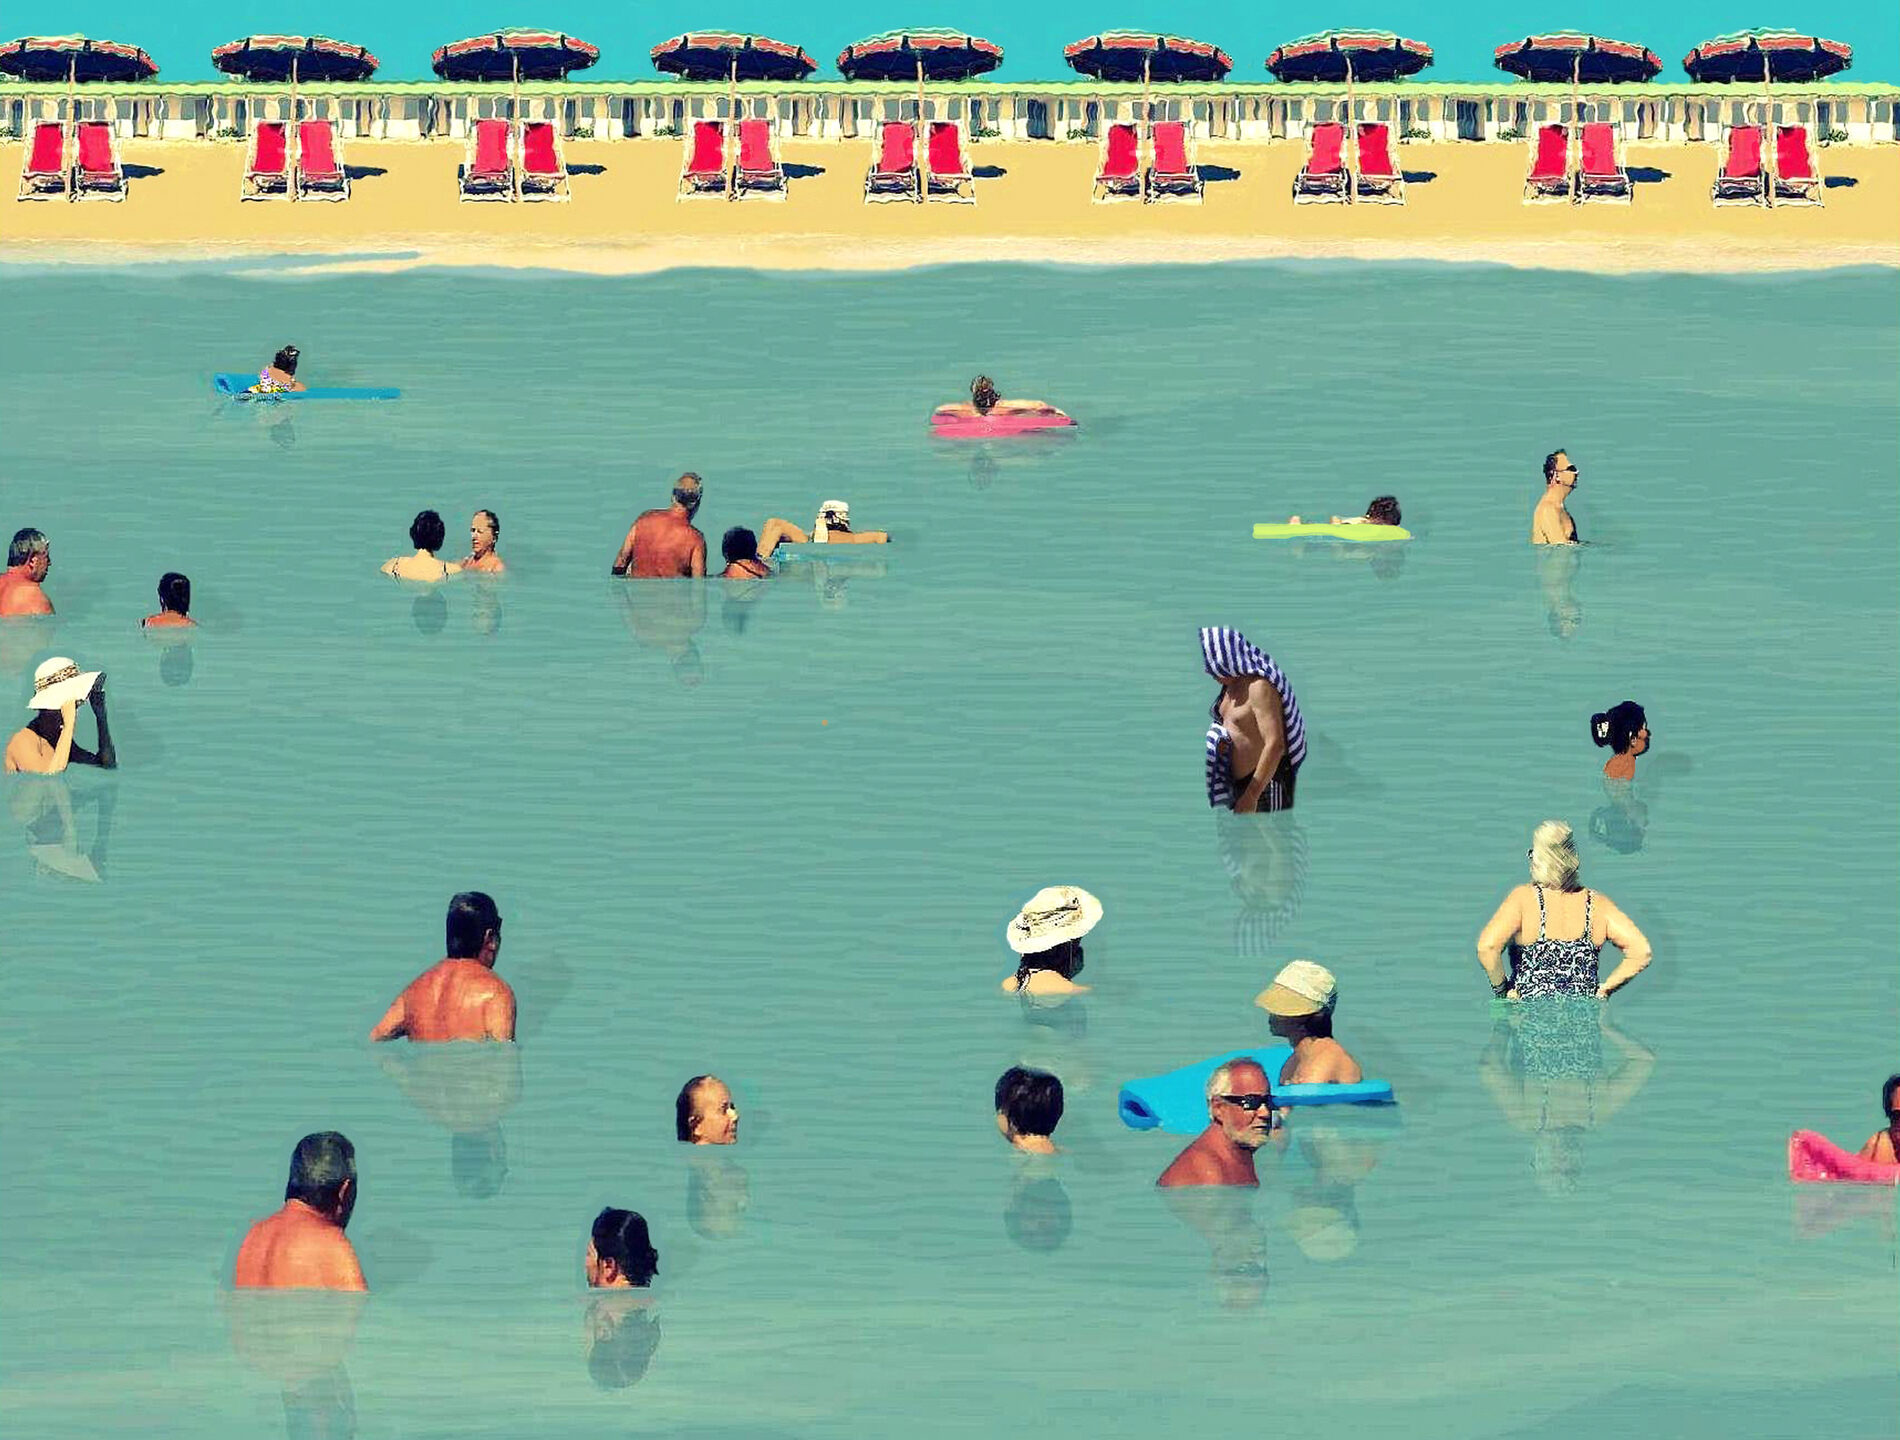 Collage of many people in the ocean at a beach, matching chairs and umbrellas lining the shore.